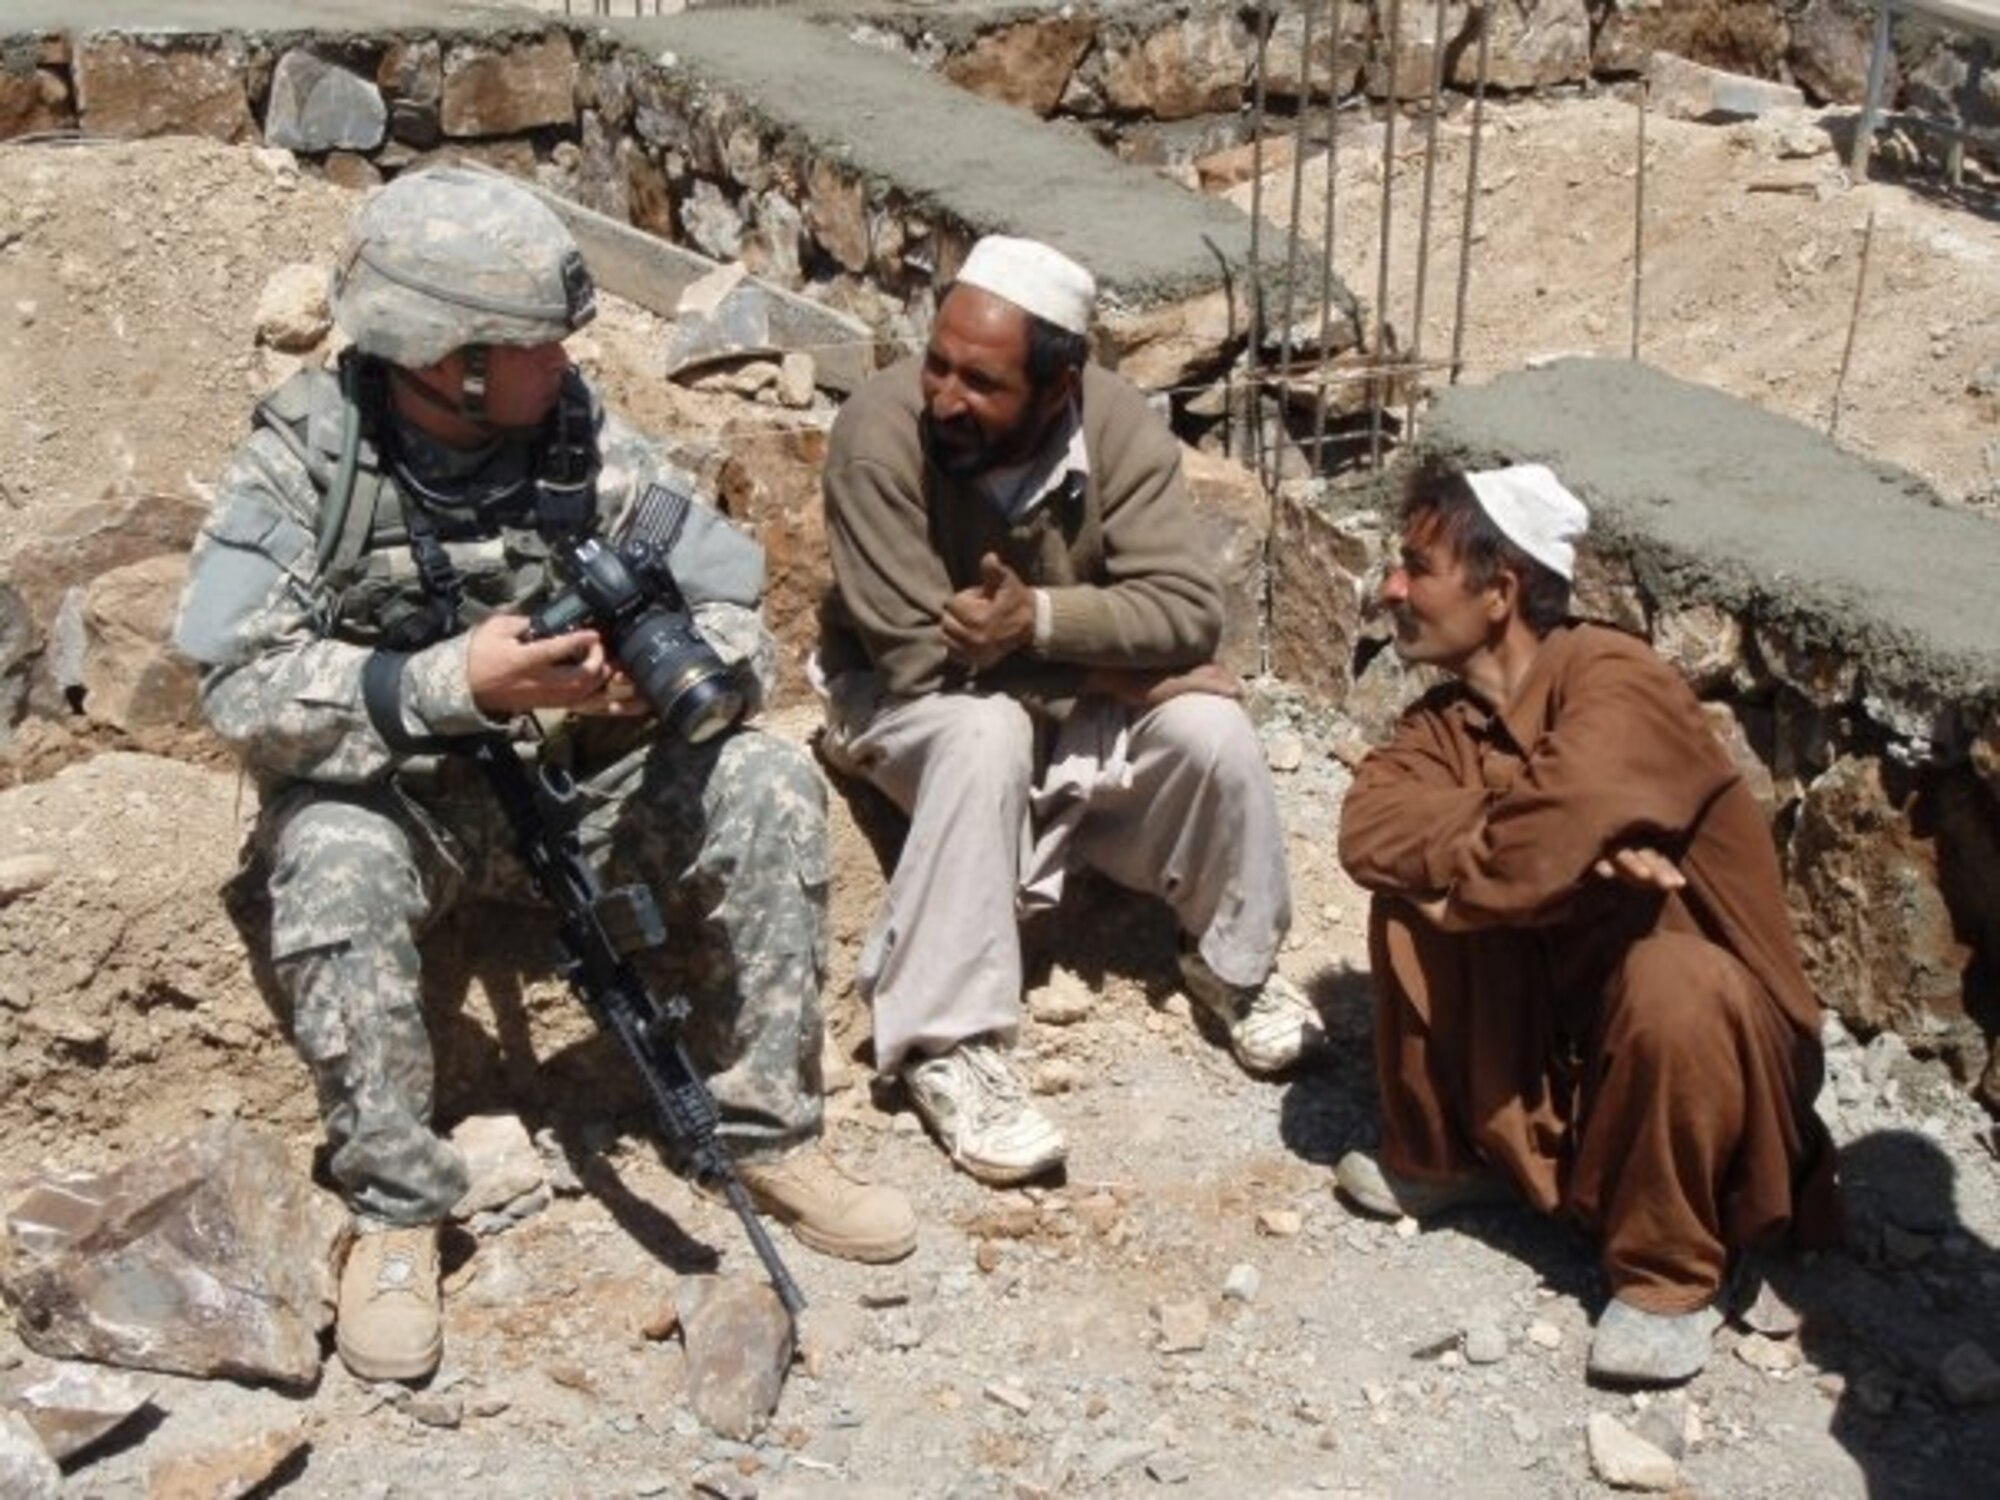 Staff Sgt. Shawn Weismiller talks to Afghan men in 2009. Sergeant Weismiller is an aerial combat photojournalist assigned to the 1st Combat Camera Squadron from Charleston Air Force Base, S.C. (U.S. Air Force photo/ Staff Sgt. Stacia Zachary)